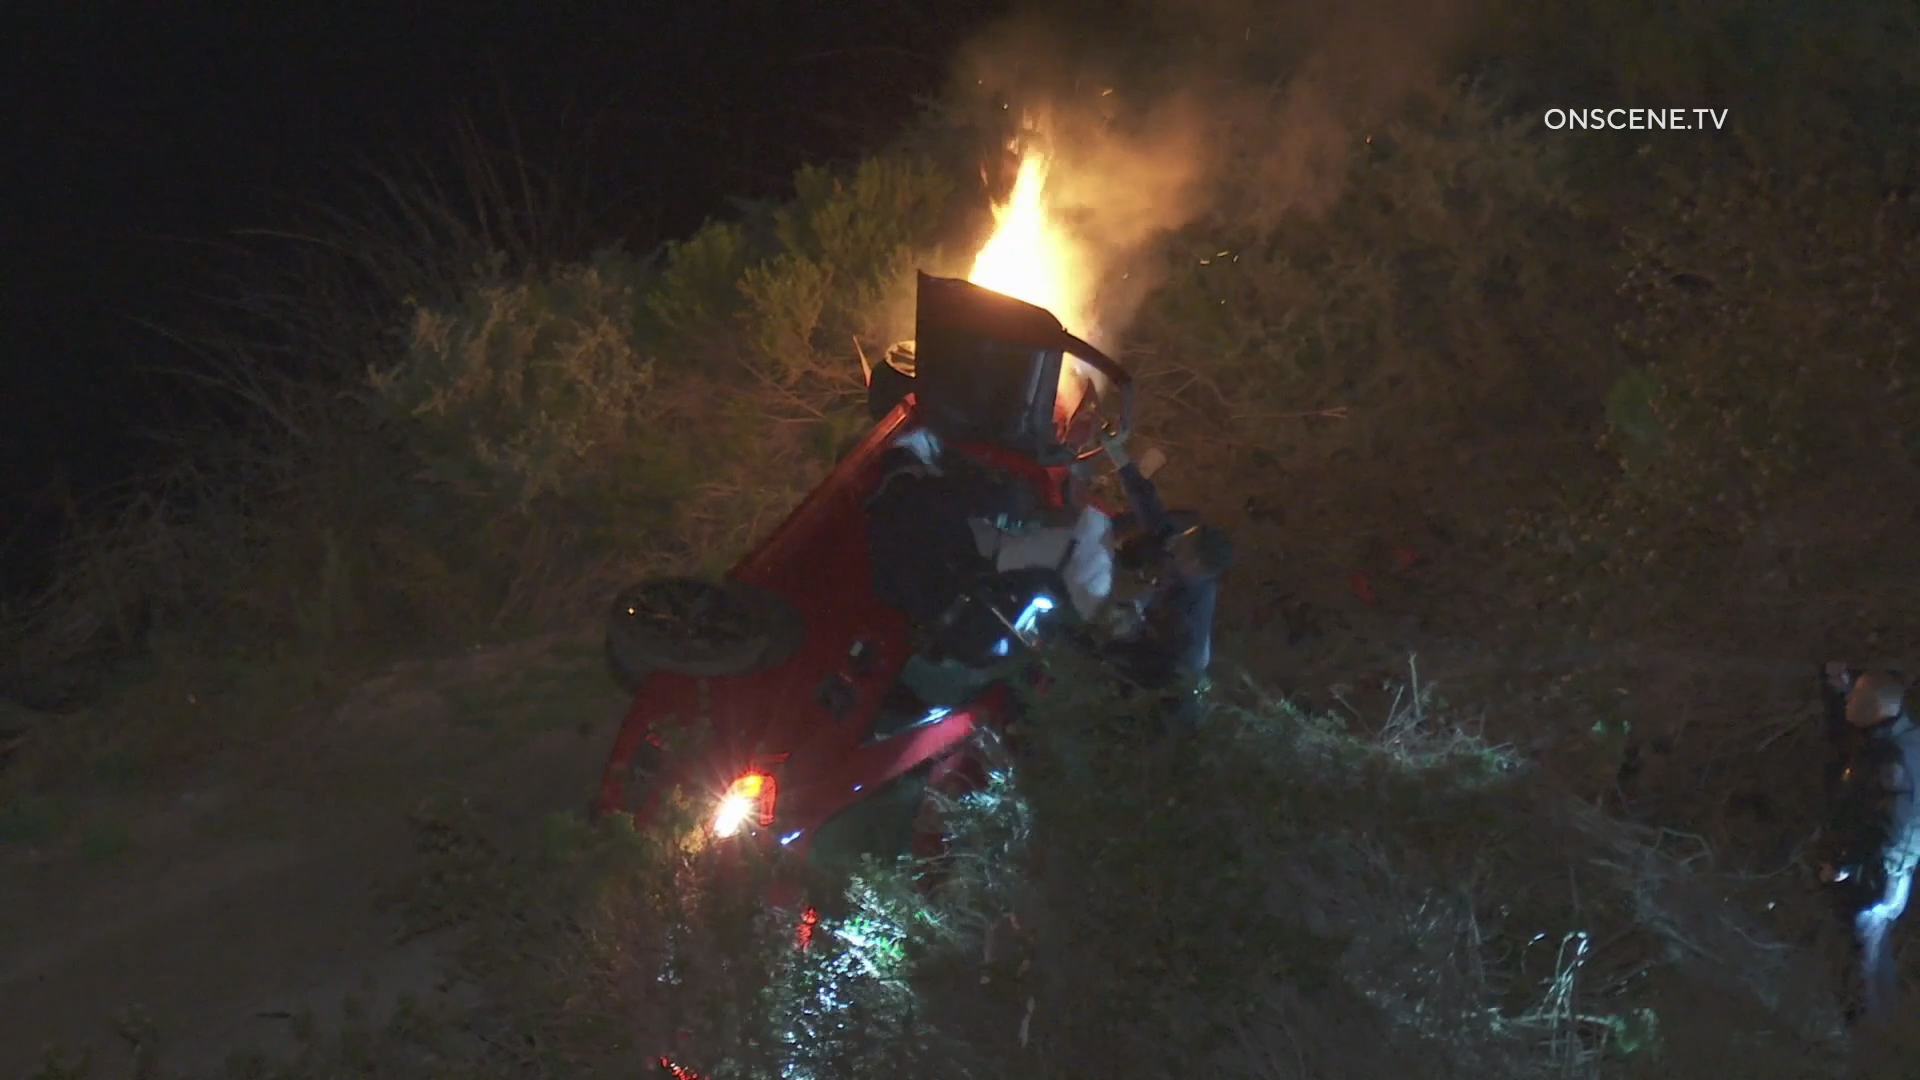 After hitting a spike strip, the car went off the freeway, down an embankment where it caught fire. CHP Officers rescued the man from the burning car.